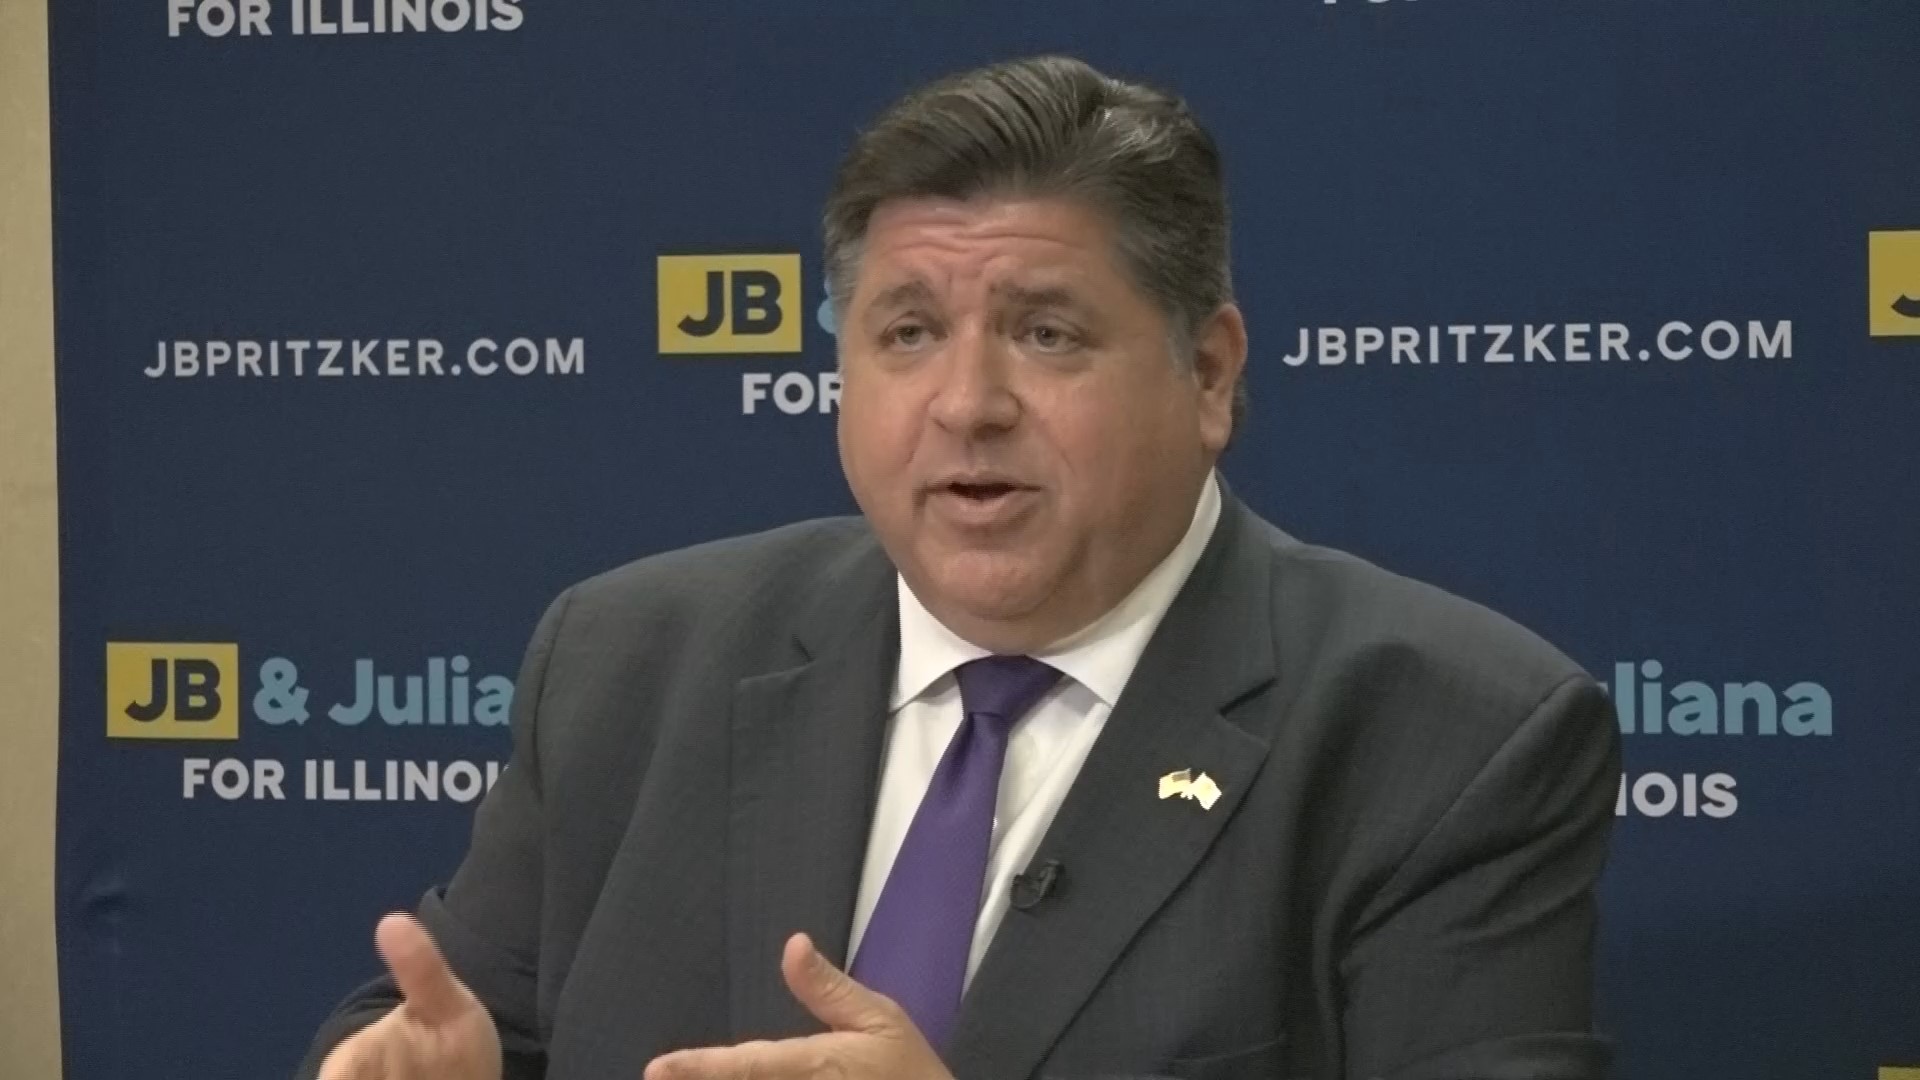 Illinois Gov. J.B. Pritzker previews his general election matchup with Republican Darren Bailey, and responds to questions about his political ambitions.